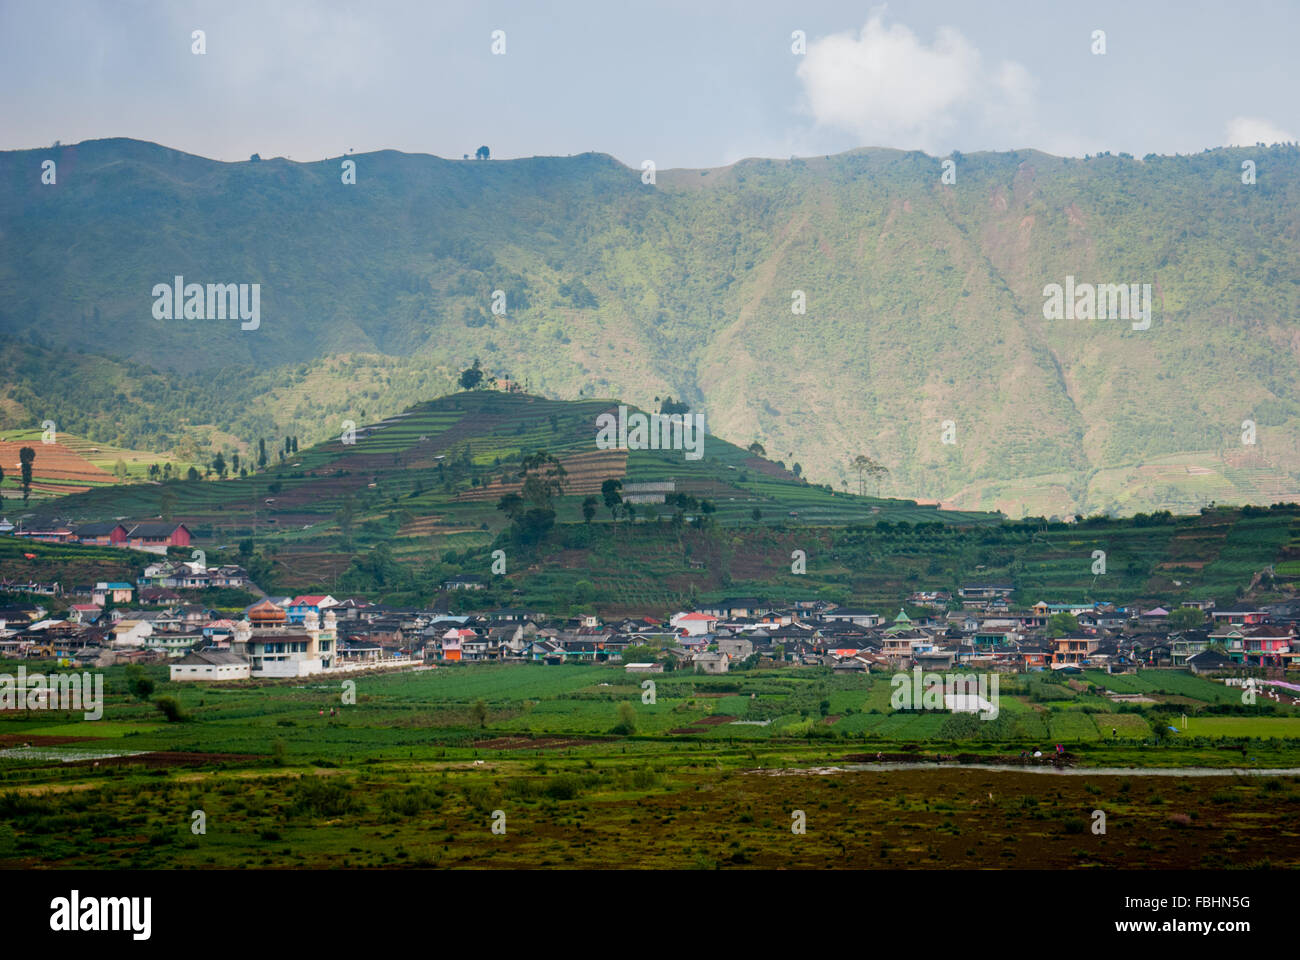 Landscape of highland villages on Dieng Plateau in Central Java province of Indonesia. Stock Photo